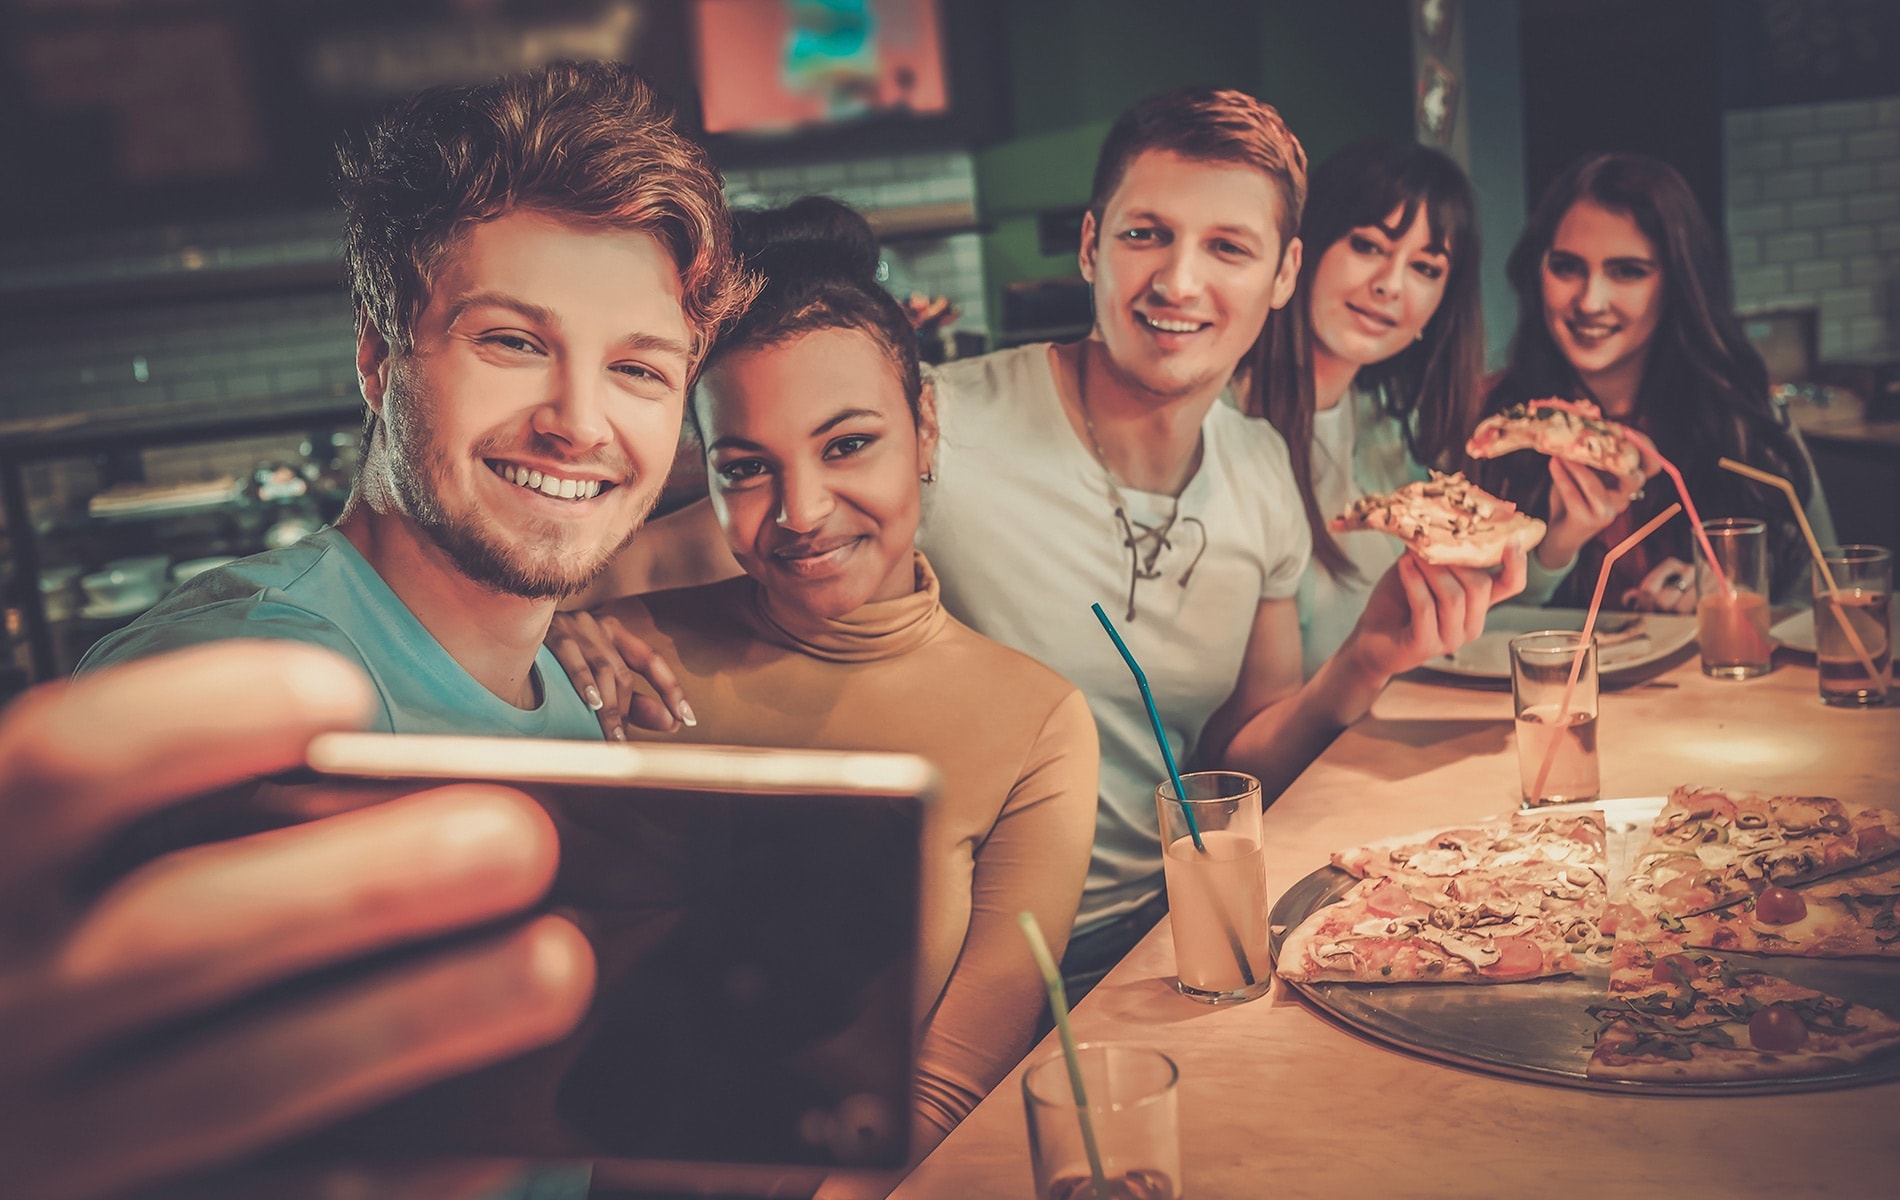 Cheerful group of five friends having fun eating pizza and taking a selfie.